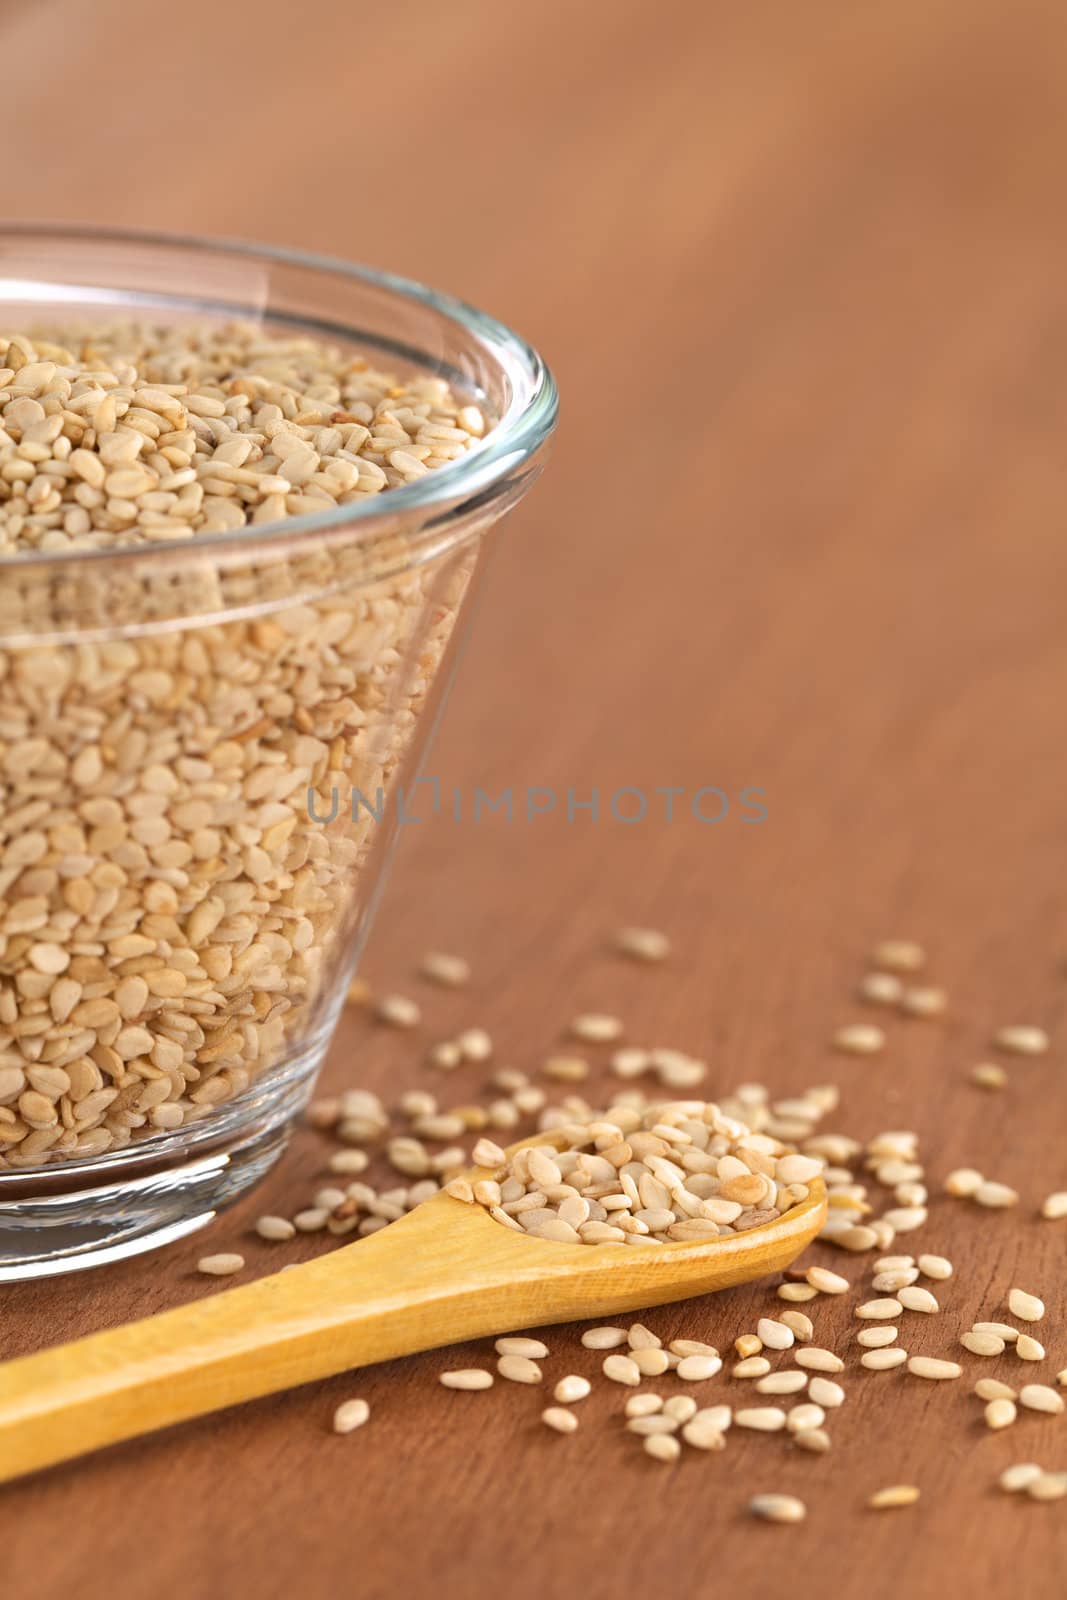 Sesame seeds on small wooden spoon with a glass bowl beside (Selective Focus, Focus on the front sesame seeds on the spoon)